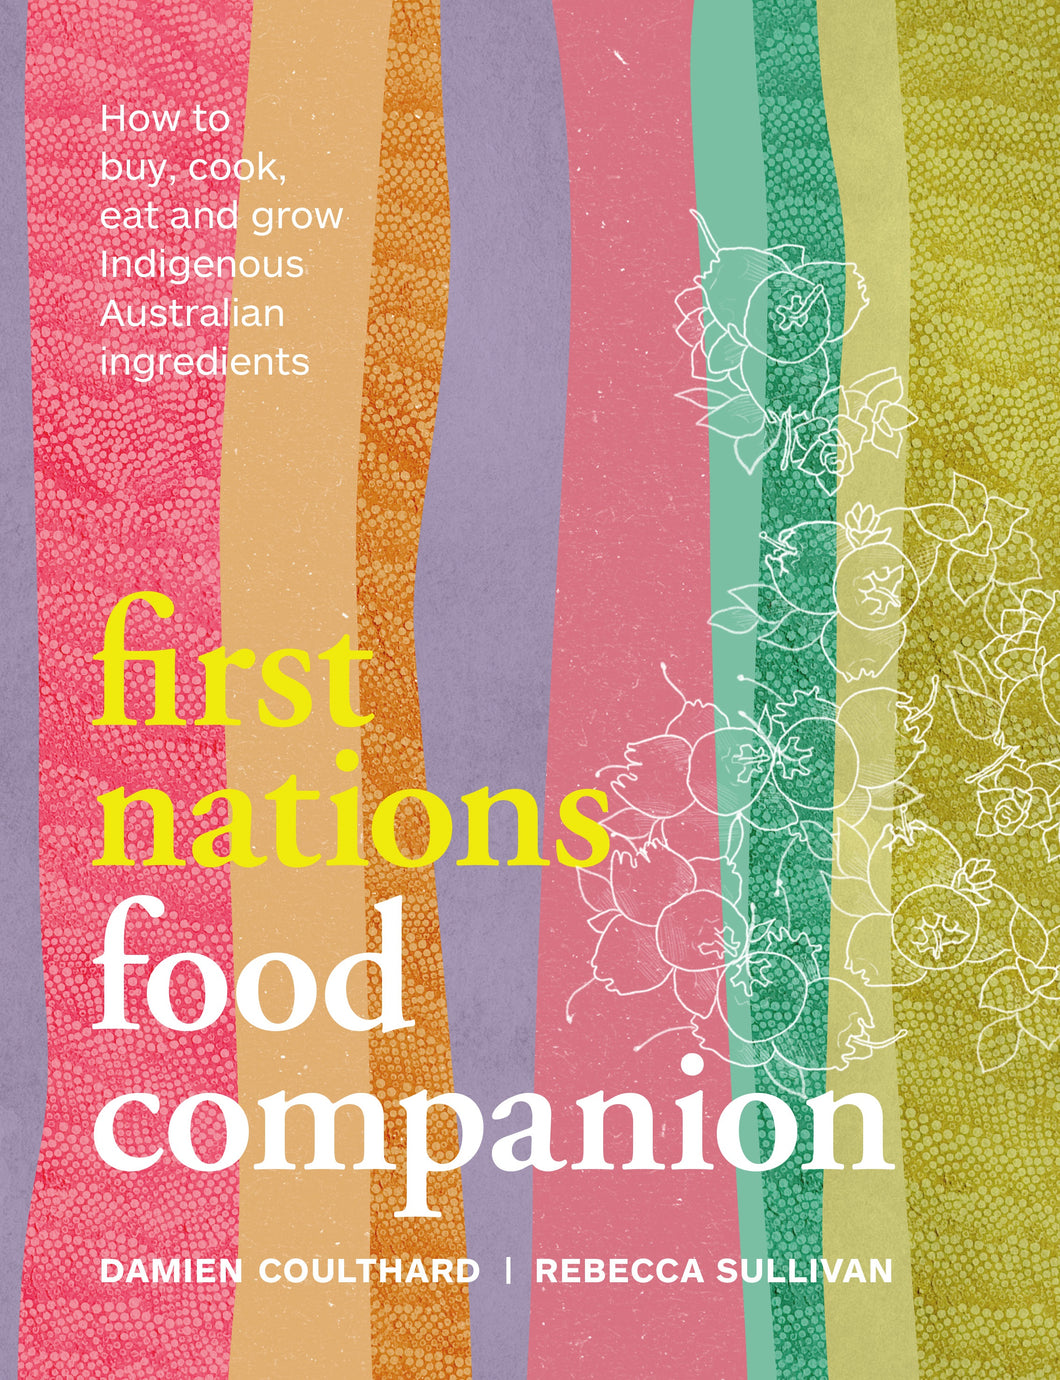 First Nations Food Companion by Damien Coulthard and Rebecca Sullivan